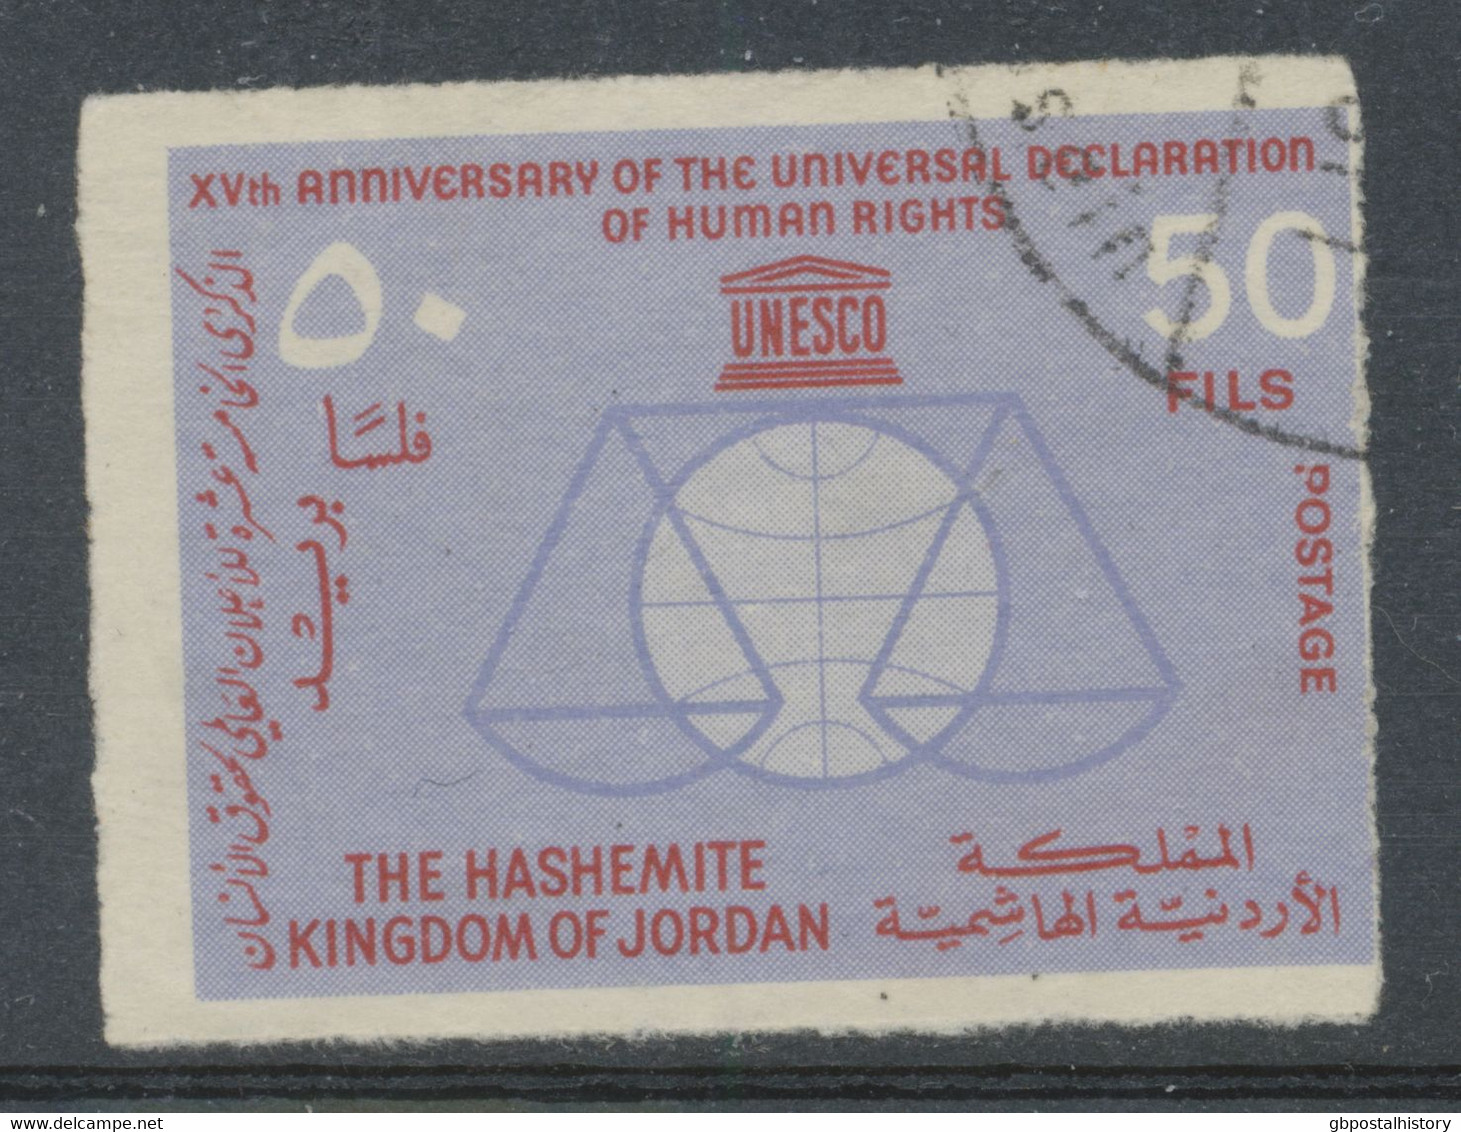 JORDAN 1963 15th Anniversary Of The Proclamation Of Human Rights By Unesco 50 F Very Fine Rouletted/imperforated Stamp - Jordanien